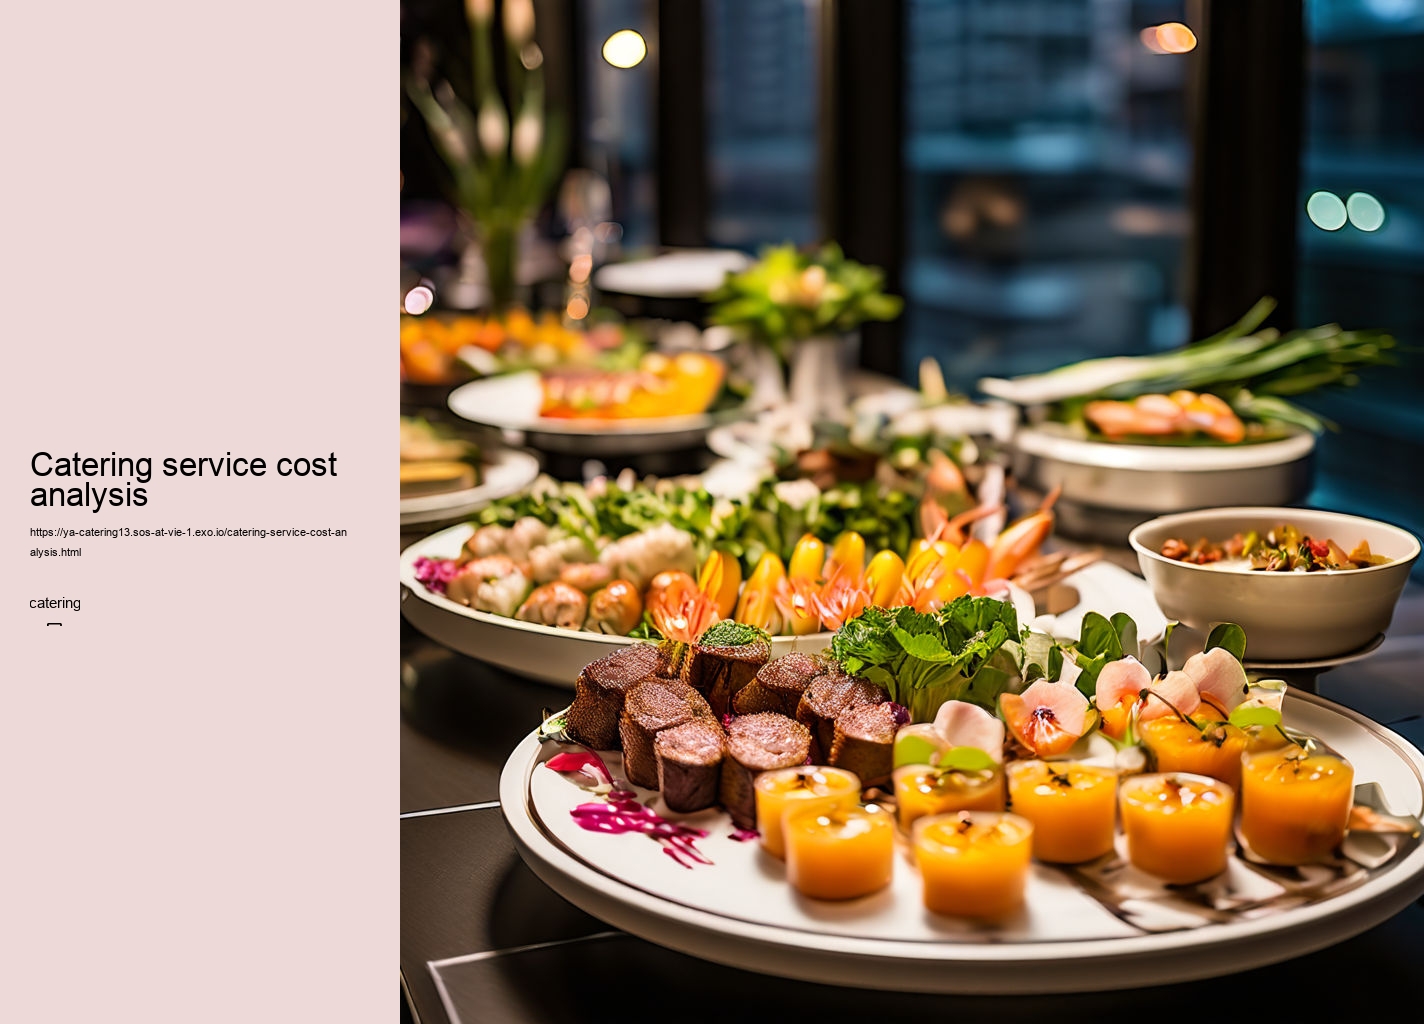 Catering service cost analysis